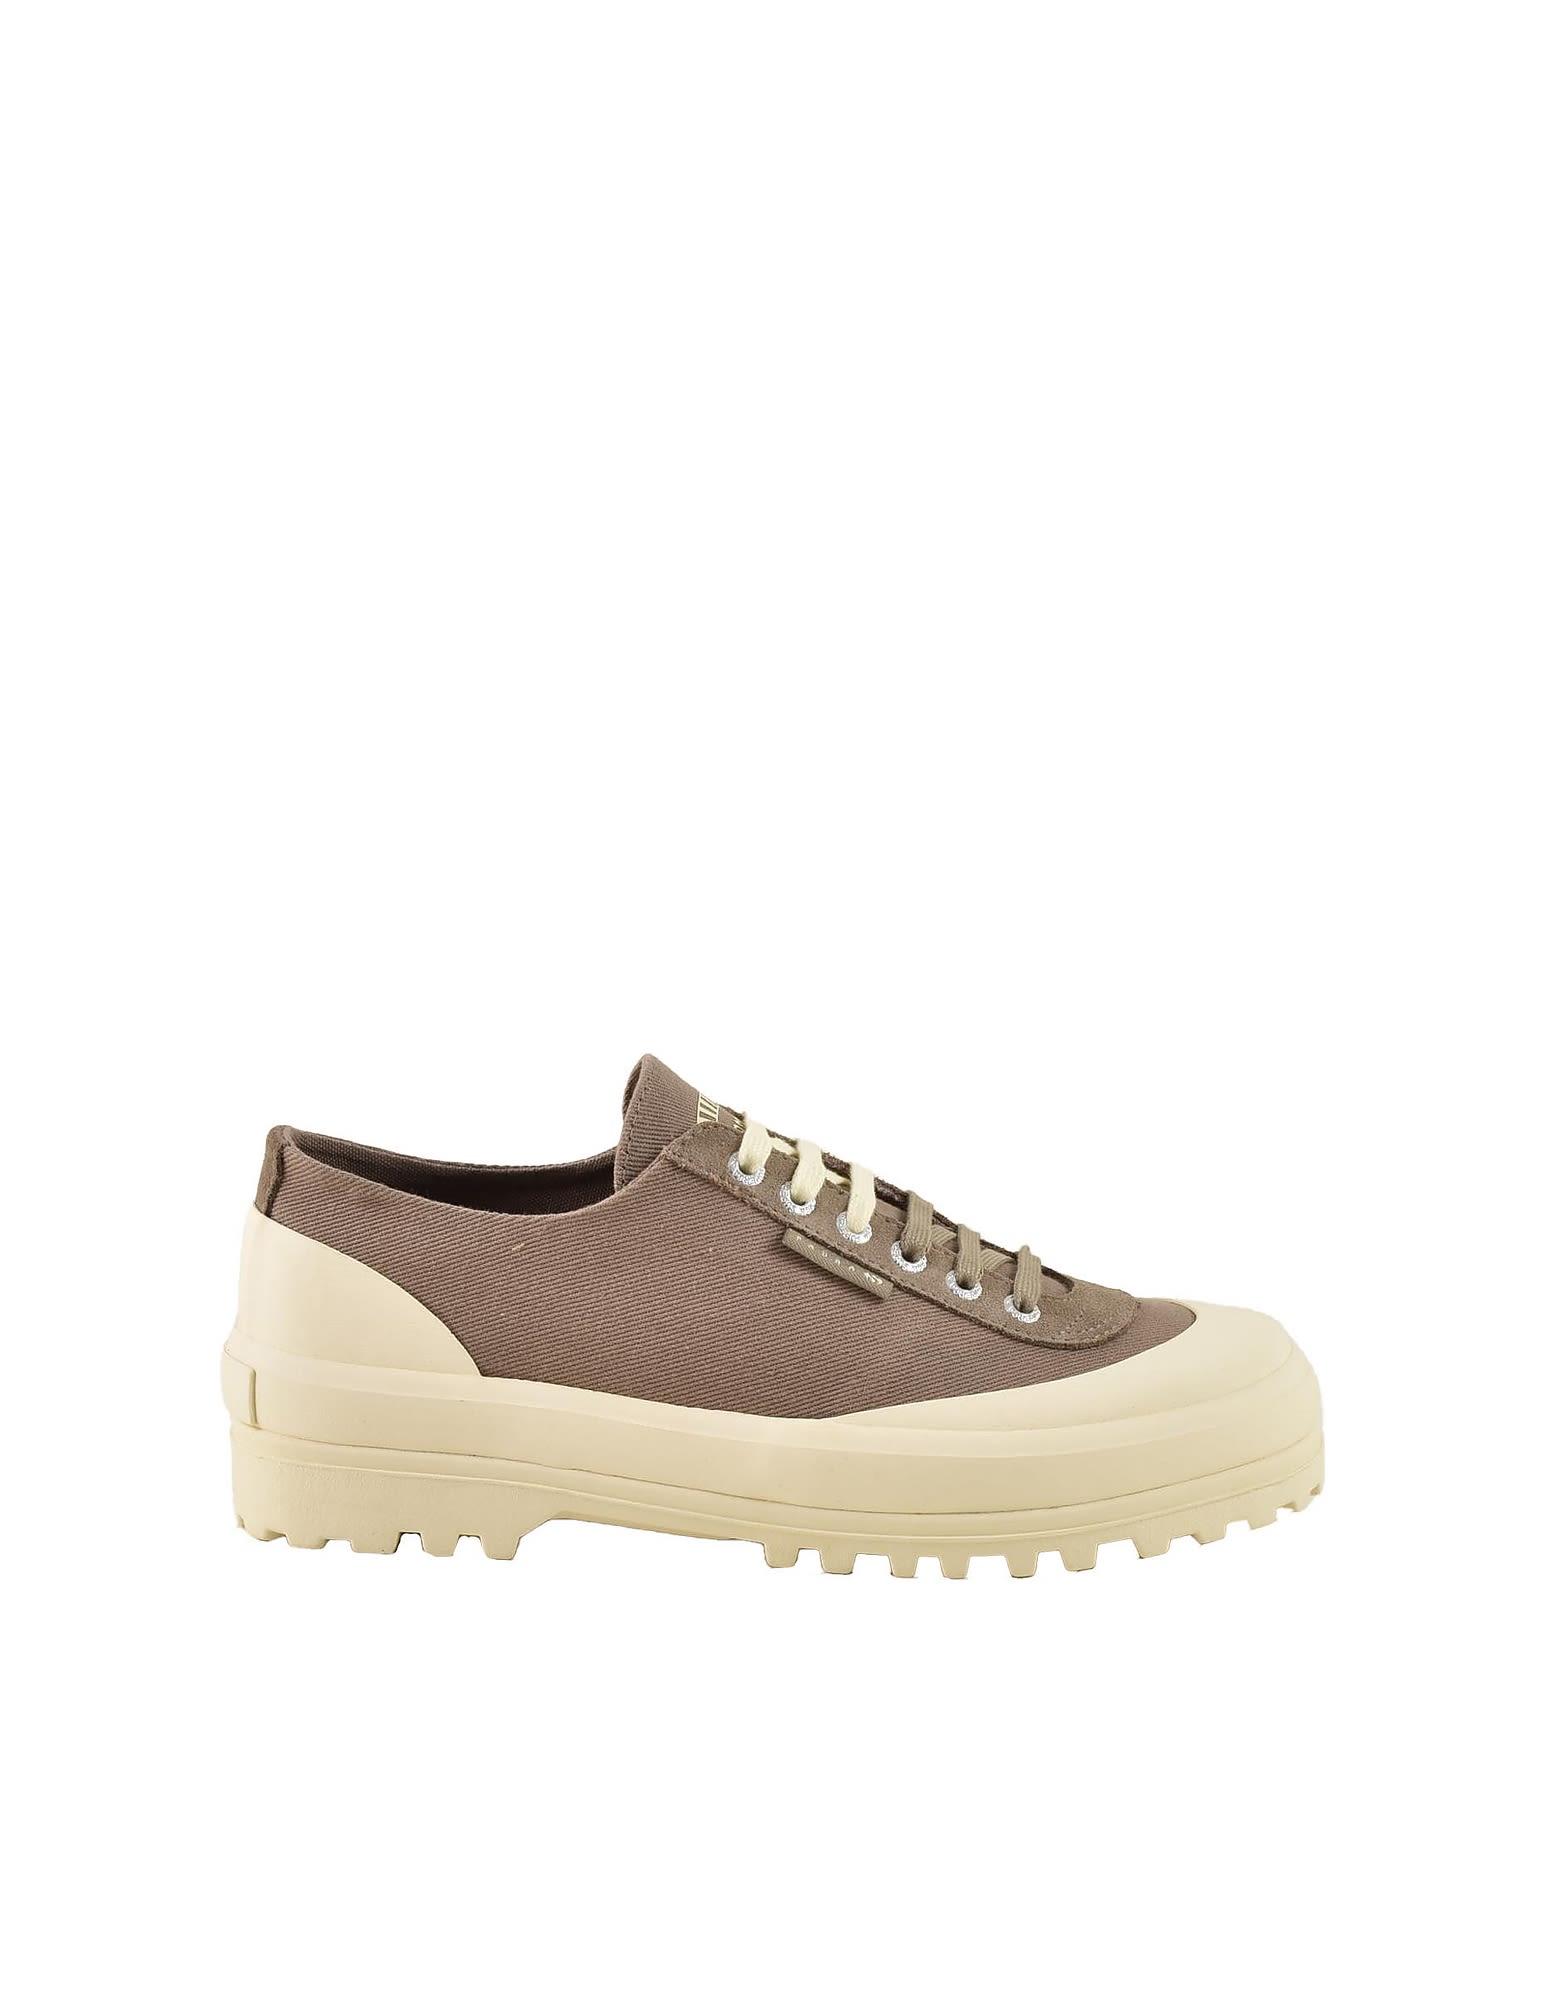 Superga Leather White / Brown Sneakers for Men | Lyst